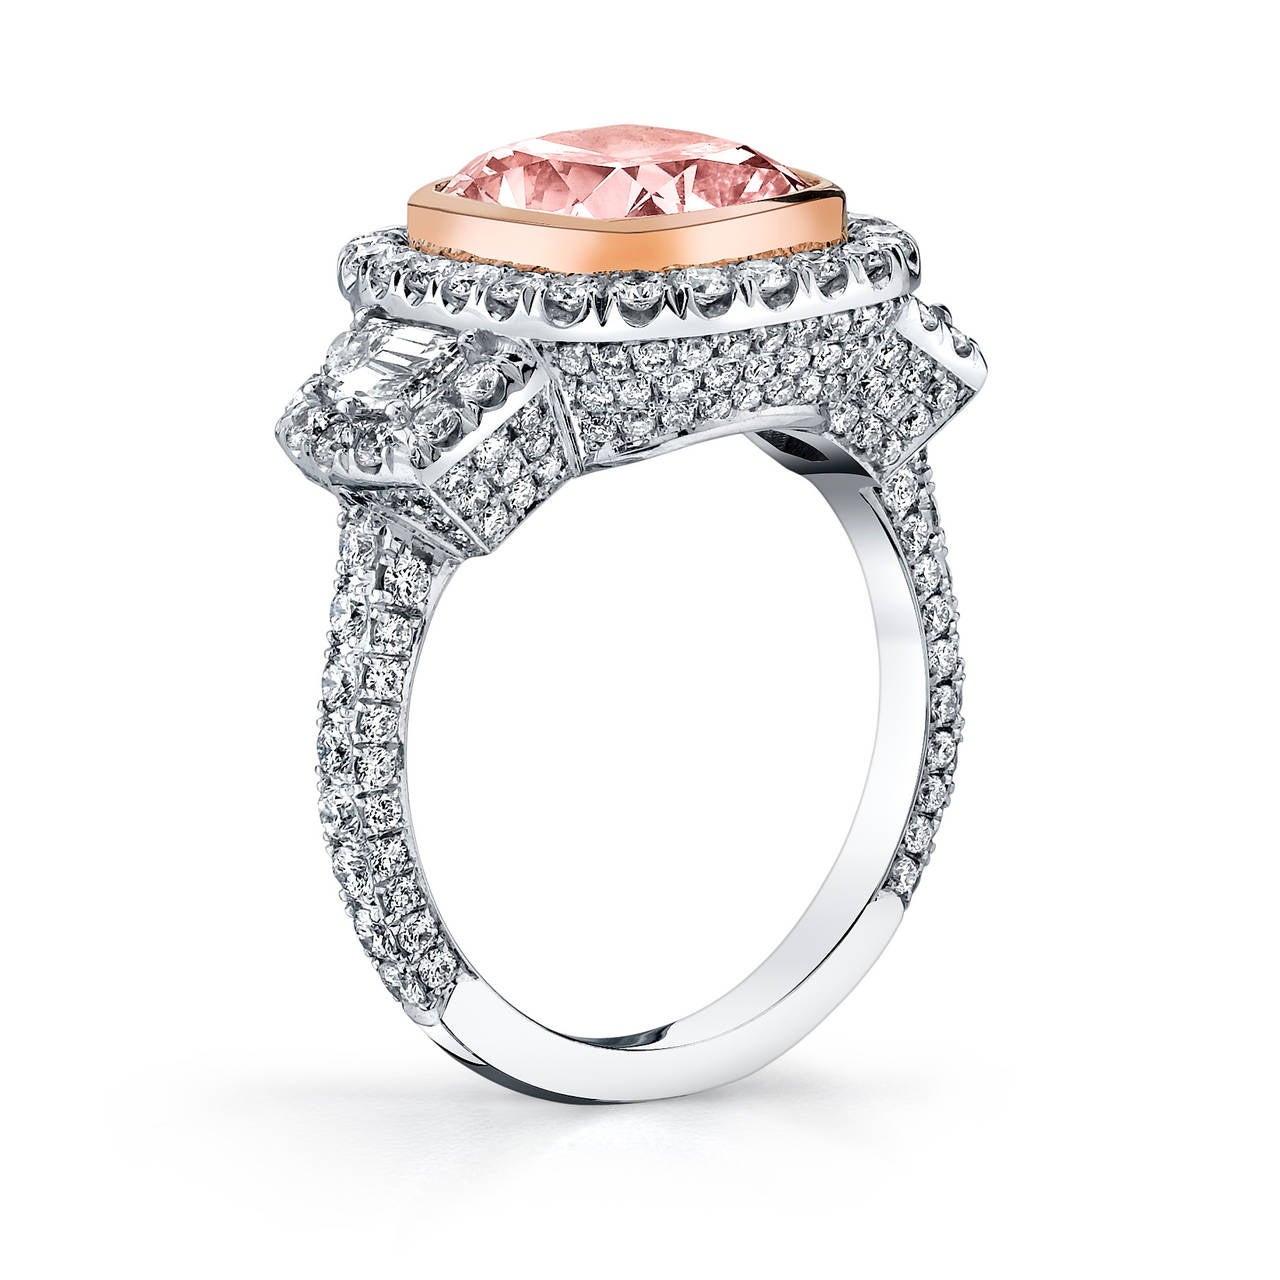 This most stunning piece from Burdeen's Jewelry...is a 3 Stone Platinum & 18K Rose Gold Ring. The ring has a center Light Pink Cushion Diamond (4.01 ctw & GIA Certified), 2 Cadillac Trapezoid side stones (.48 ctw), a pave diamond halo, a pave